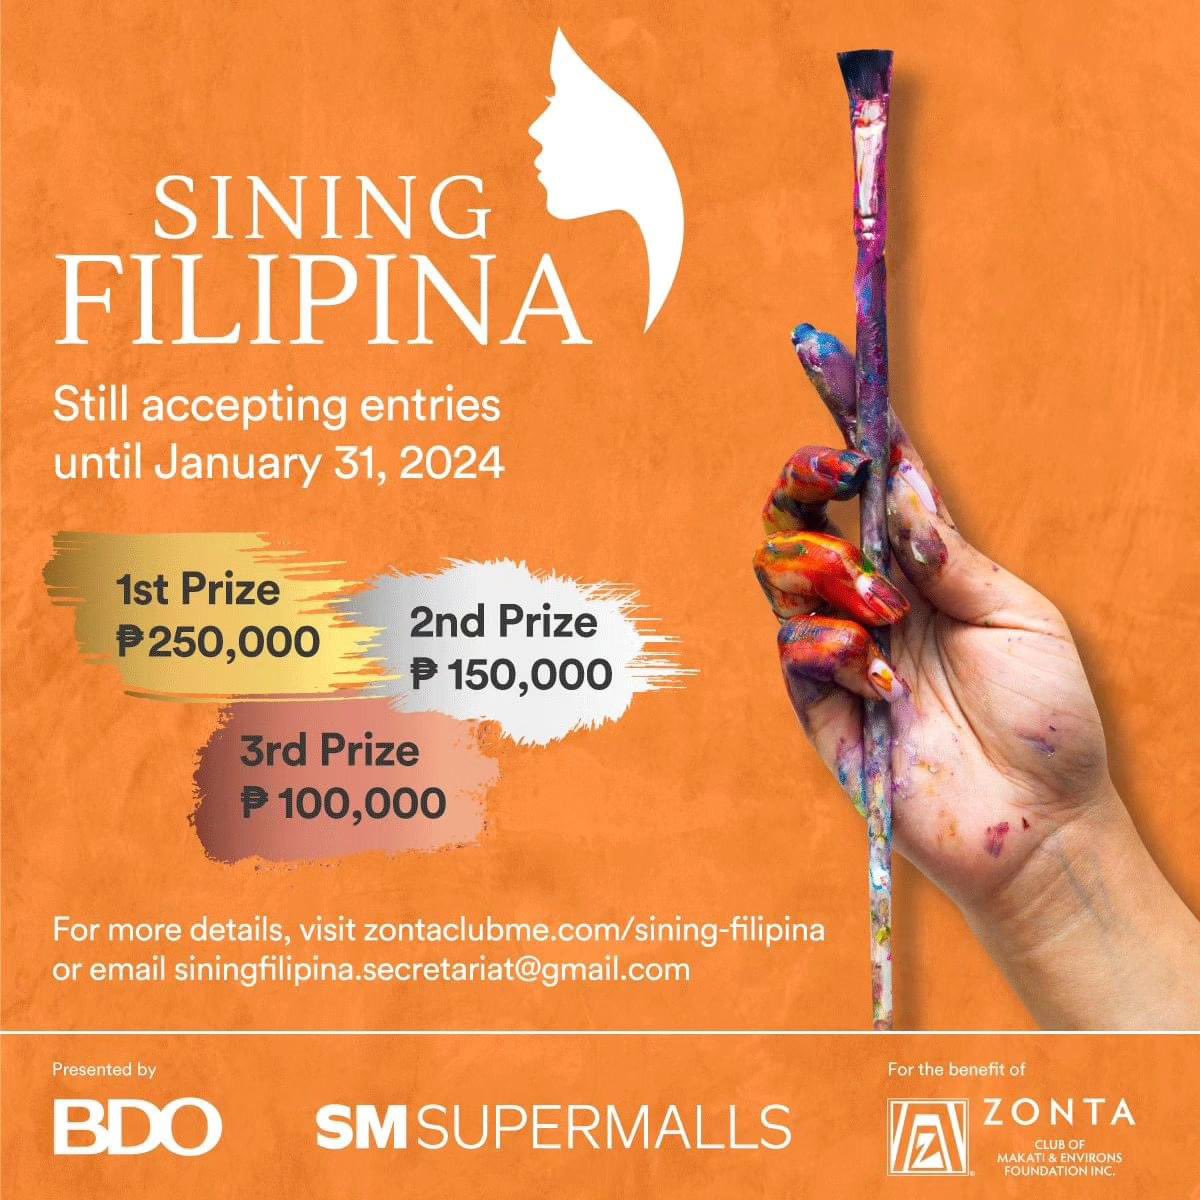 Don’t miss your chance to shine, Filipina🙋‍♀️ Sining Filipina, the first all-female national art competition in the Philippines, is still accepting entries until January 31,2024. Cash prizes of up to P250,000! For details, visit zontaclubme.com/sining-filipina